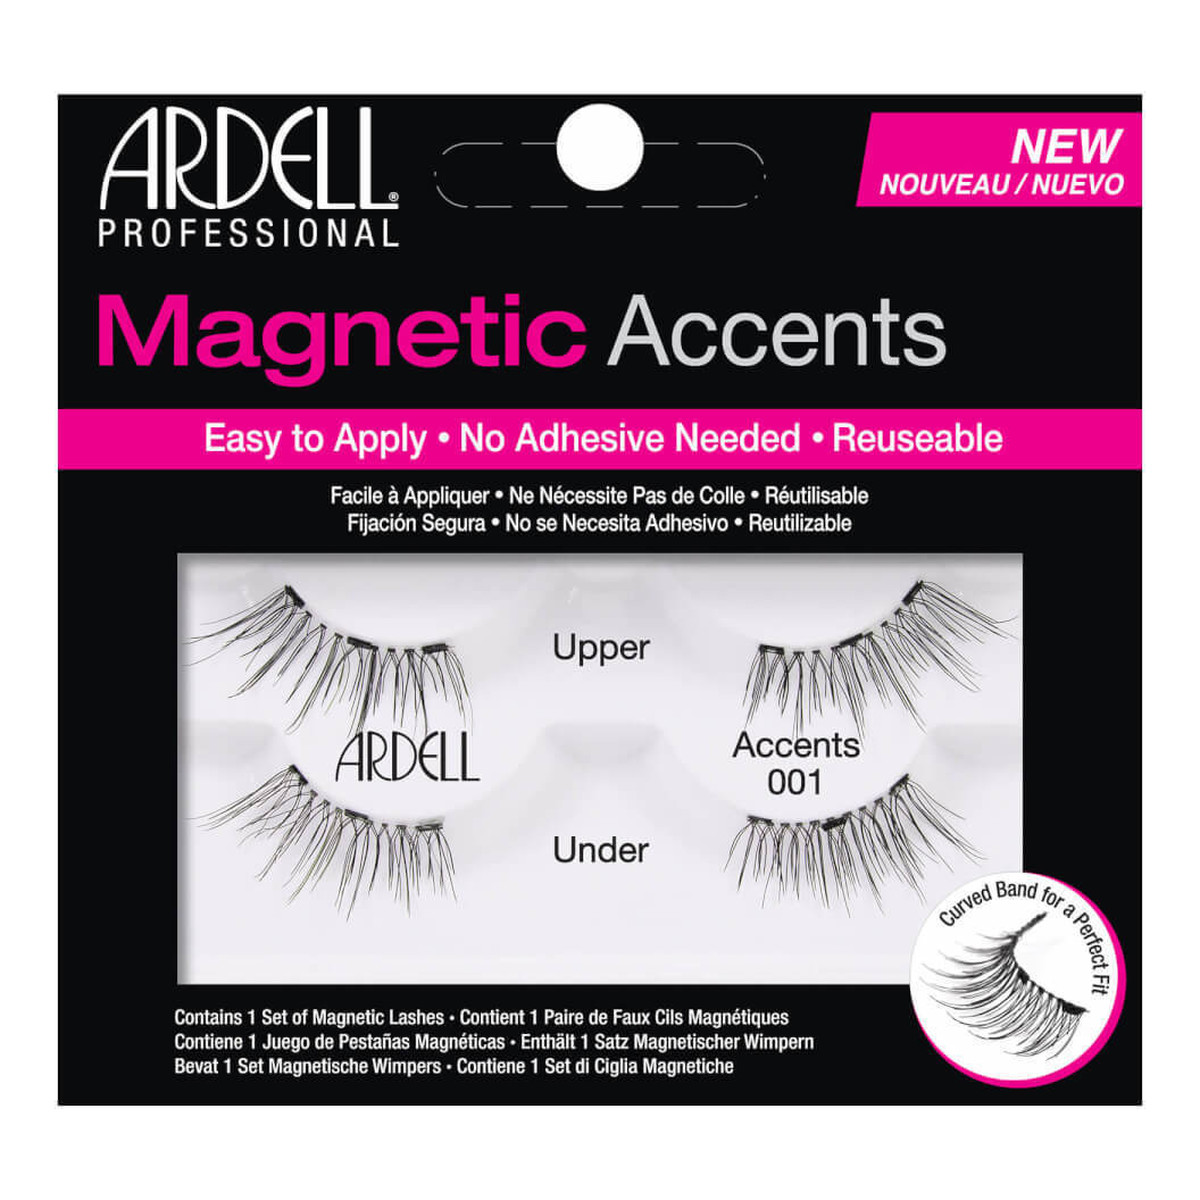 Ardell Magnetic Accents RZĘSY MAGNETYCZNE NA PASKU ACCENTS 001